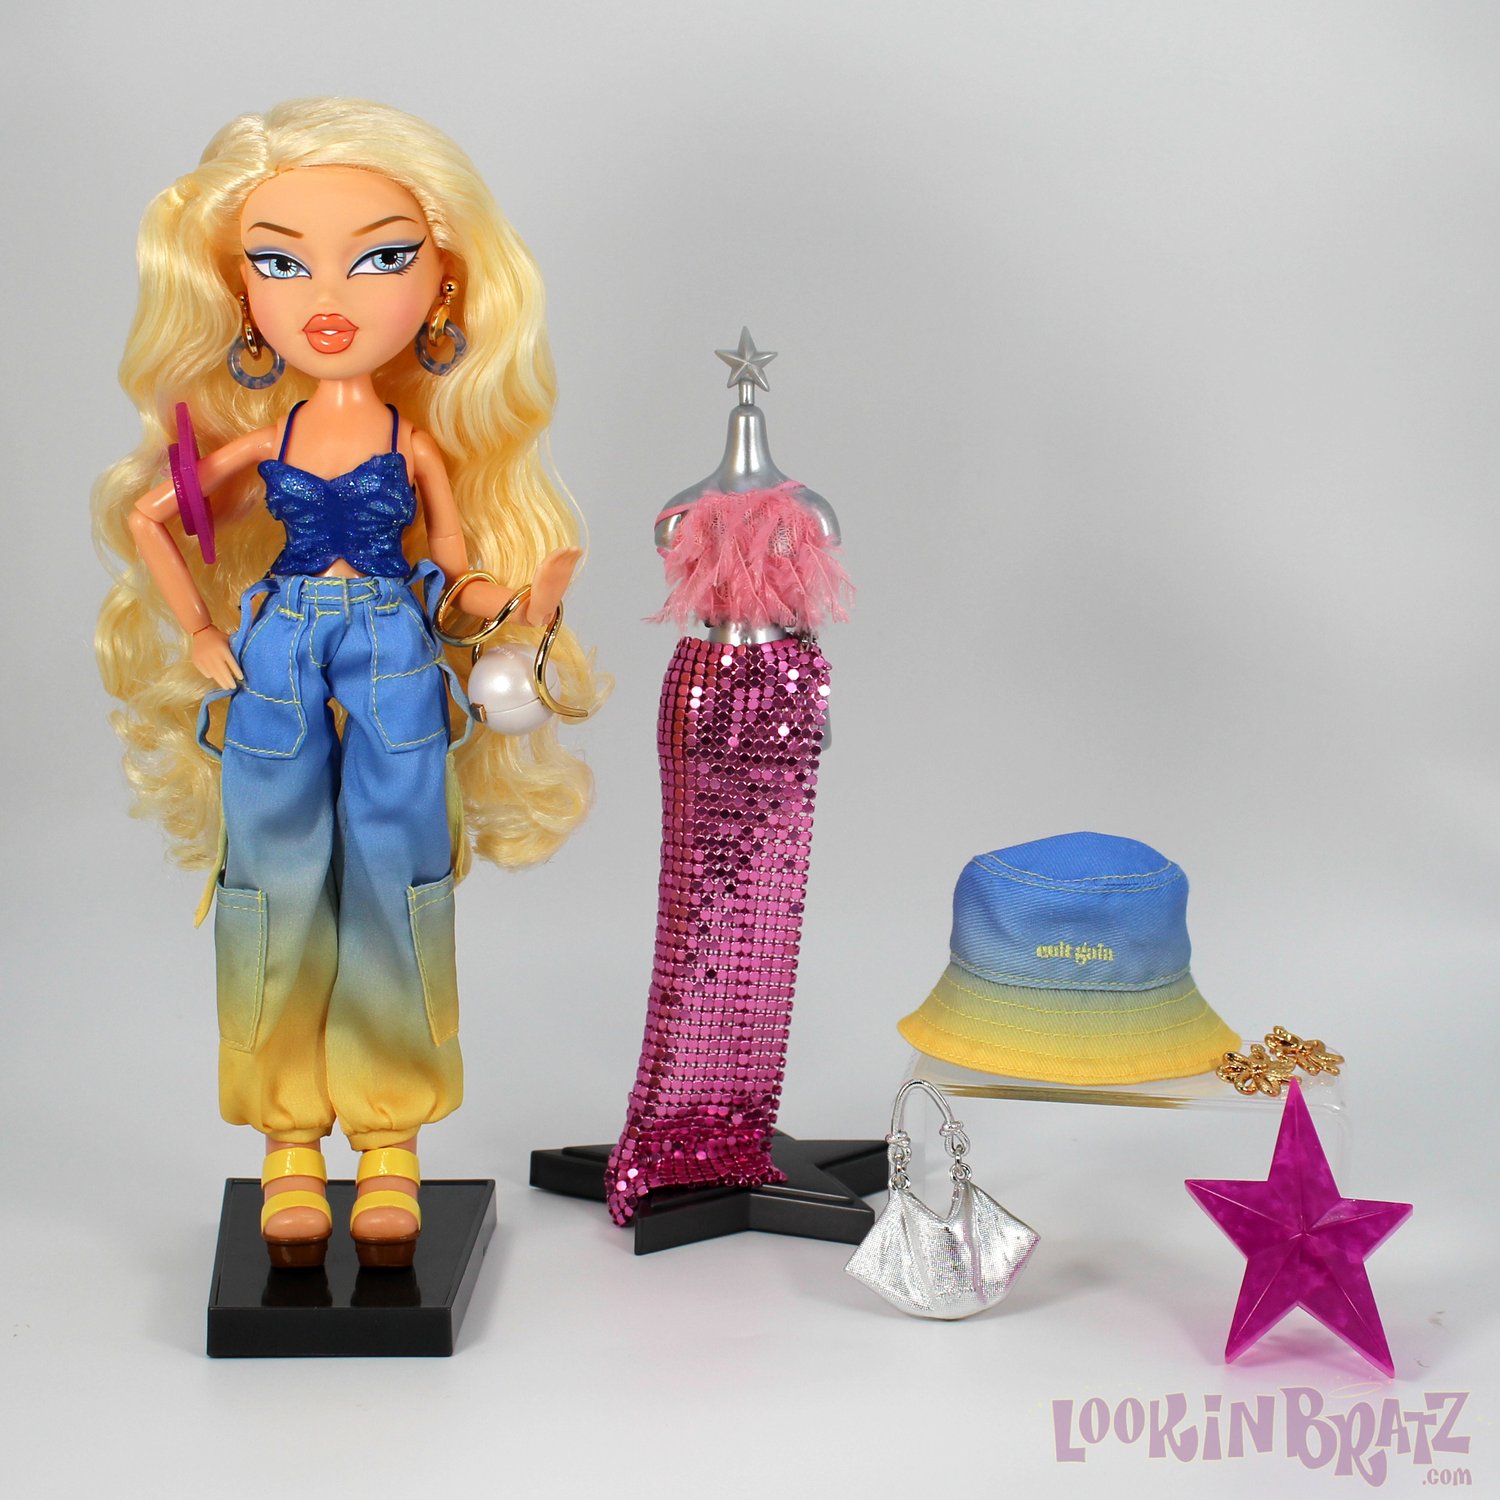 Bratz and Cult Gaia Team Up for Designer Doll Collection — See